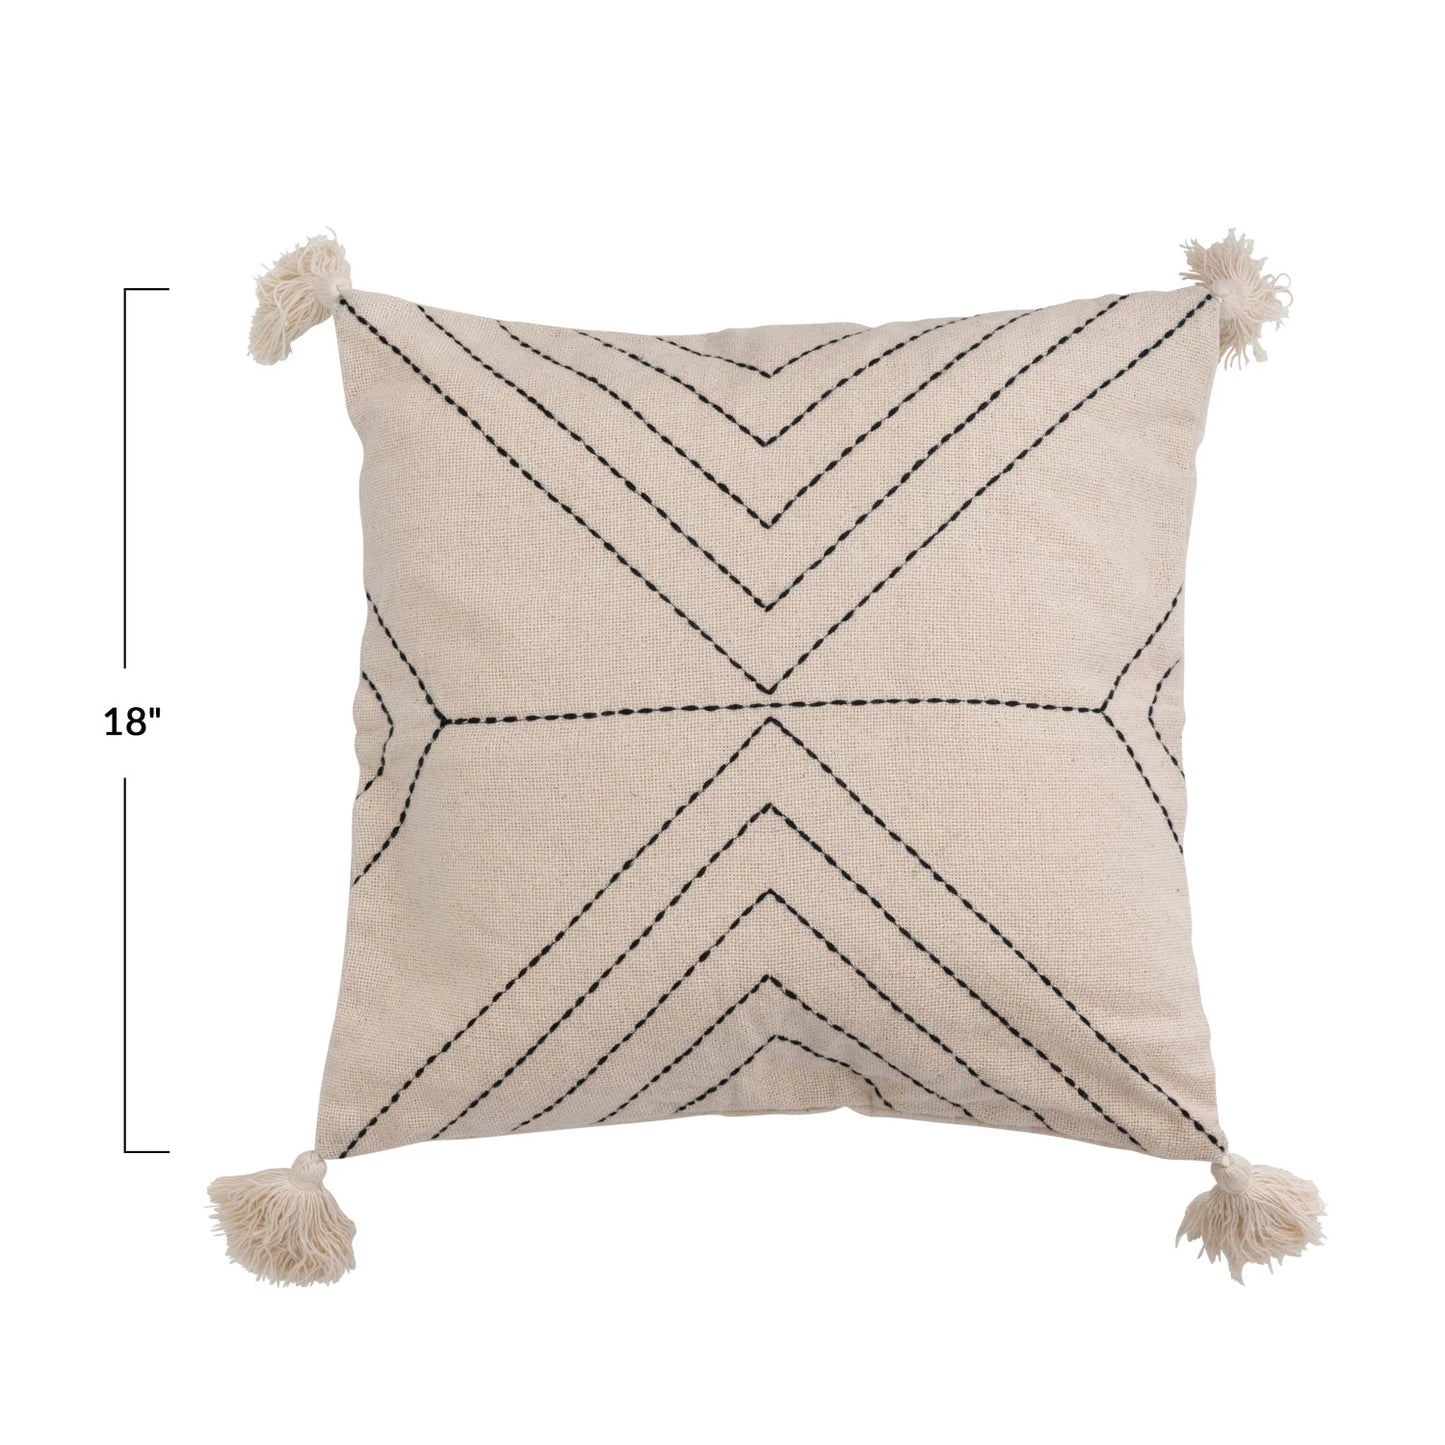 18" Cotton Blend Pillow w/ Embroidery & Tassels, polyester fill